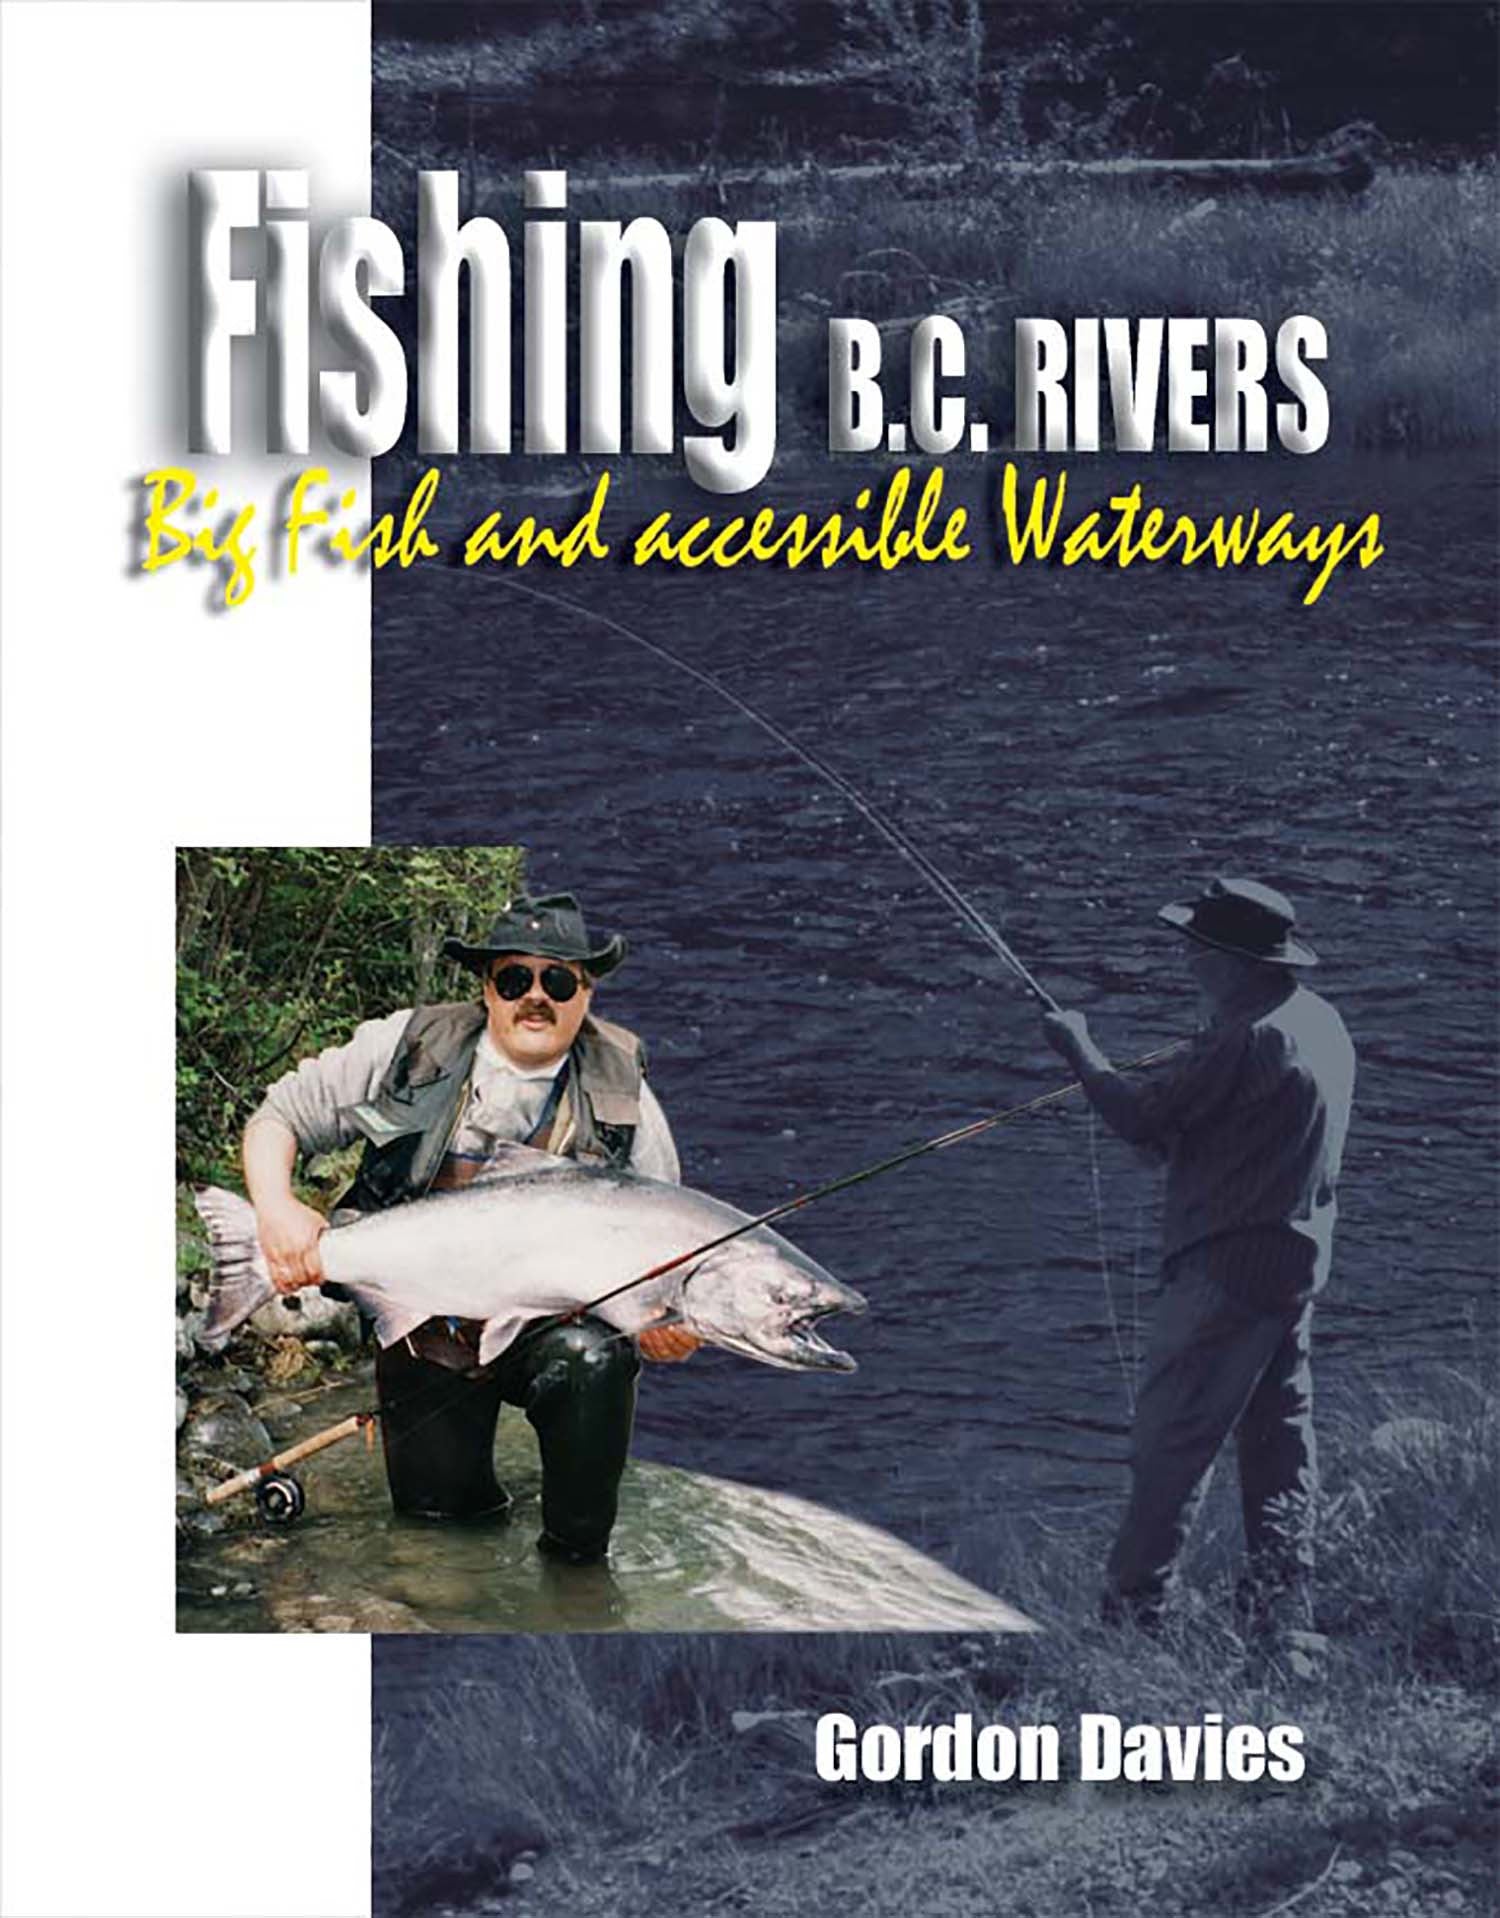 Fishing BC Rivers: big fish and accessible waterways